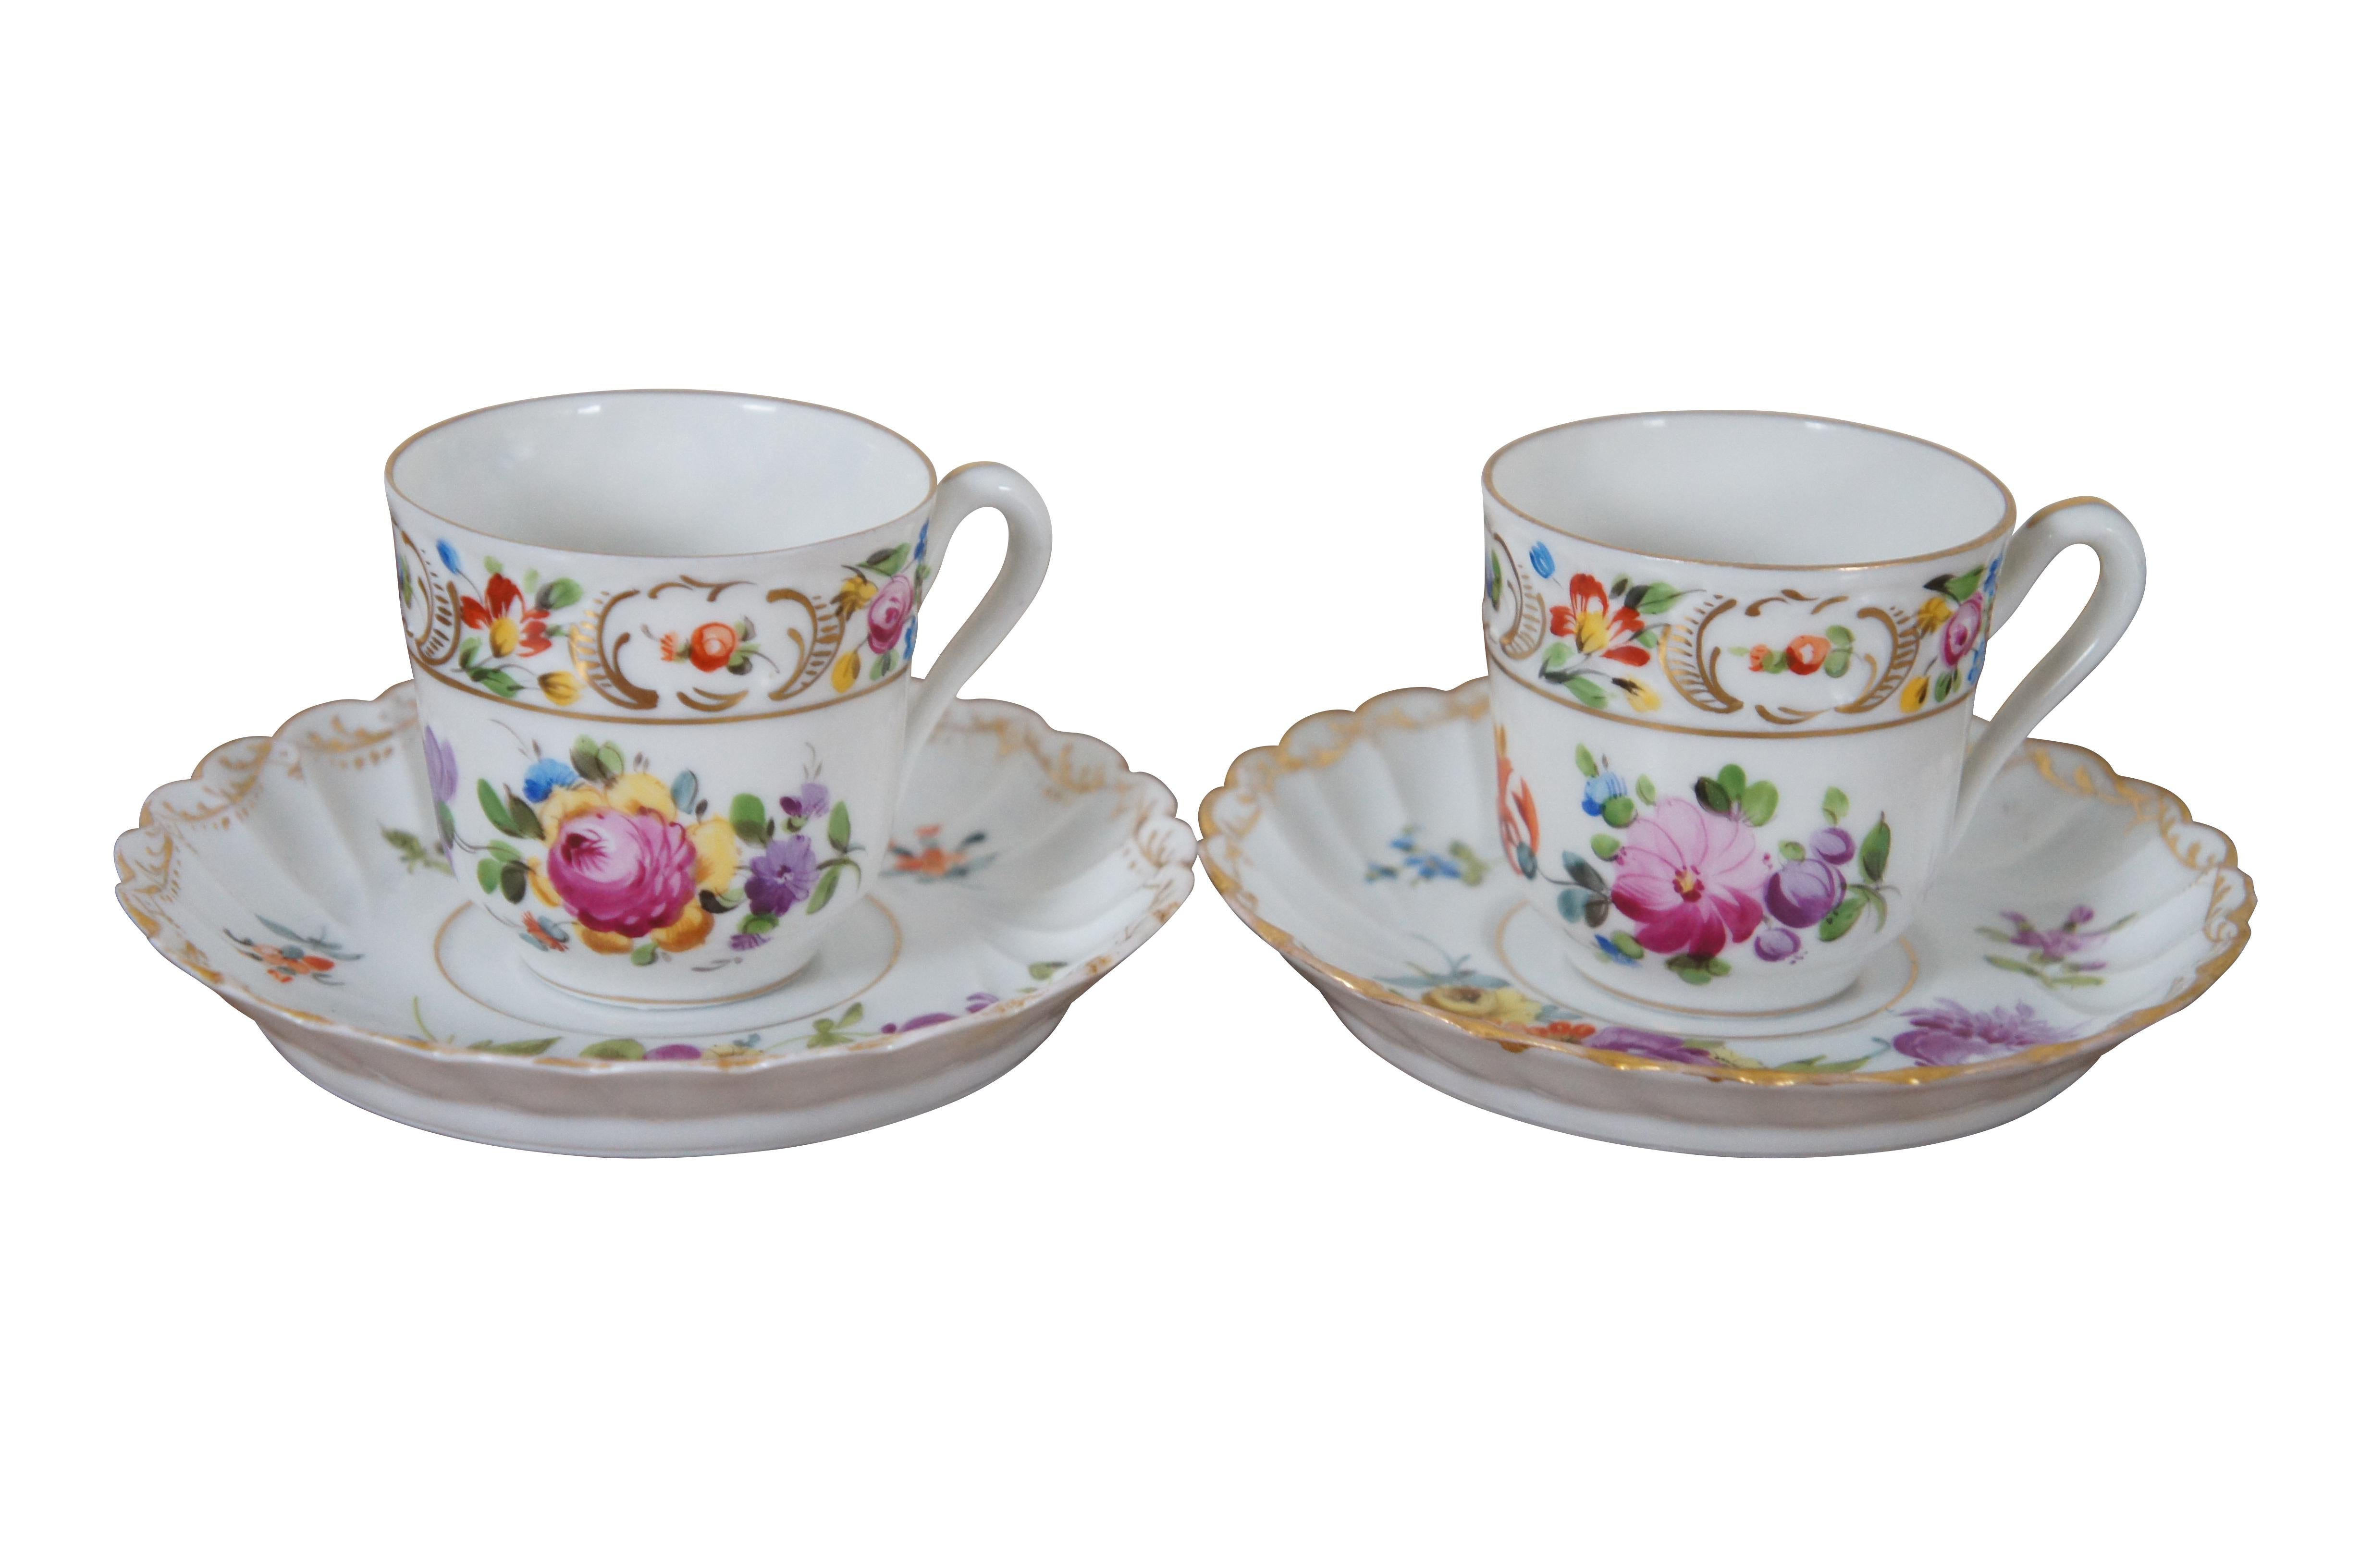 Antique four piece Carl Thieme German Dresden porcelain demitasse teacup / tea / coffee cups and saucers featuring floral design with gold accents.

Dimensions:
4.5” x 2.5” (Diameter x Height)